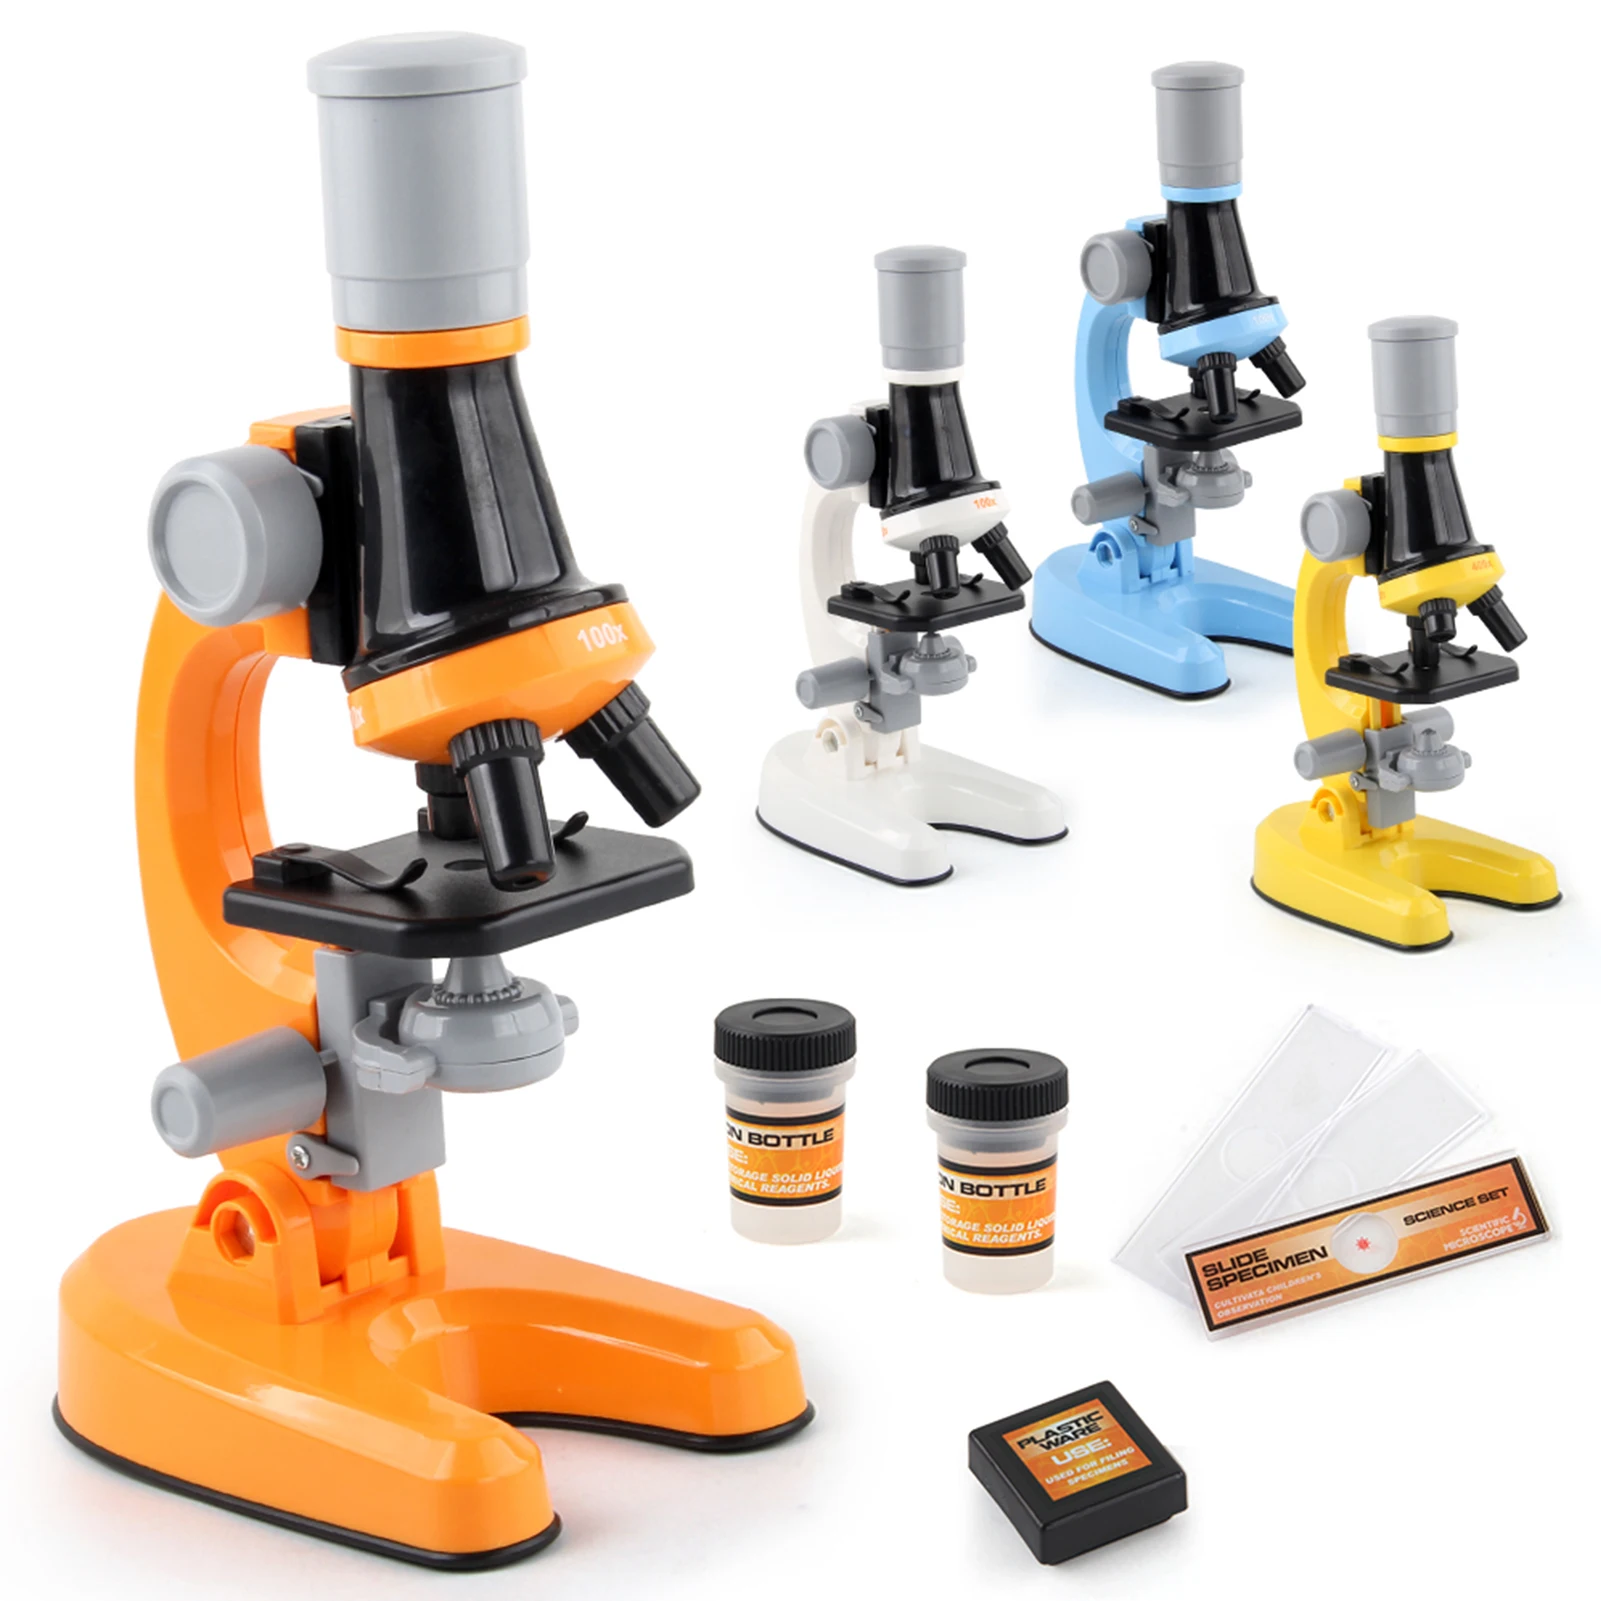 

Child's Biological Microscopes Upgraded Microscope 100X/400X /1200X Science Experiment School Kids Educational Toys